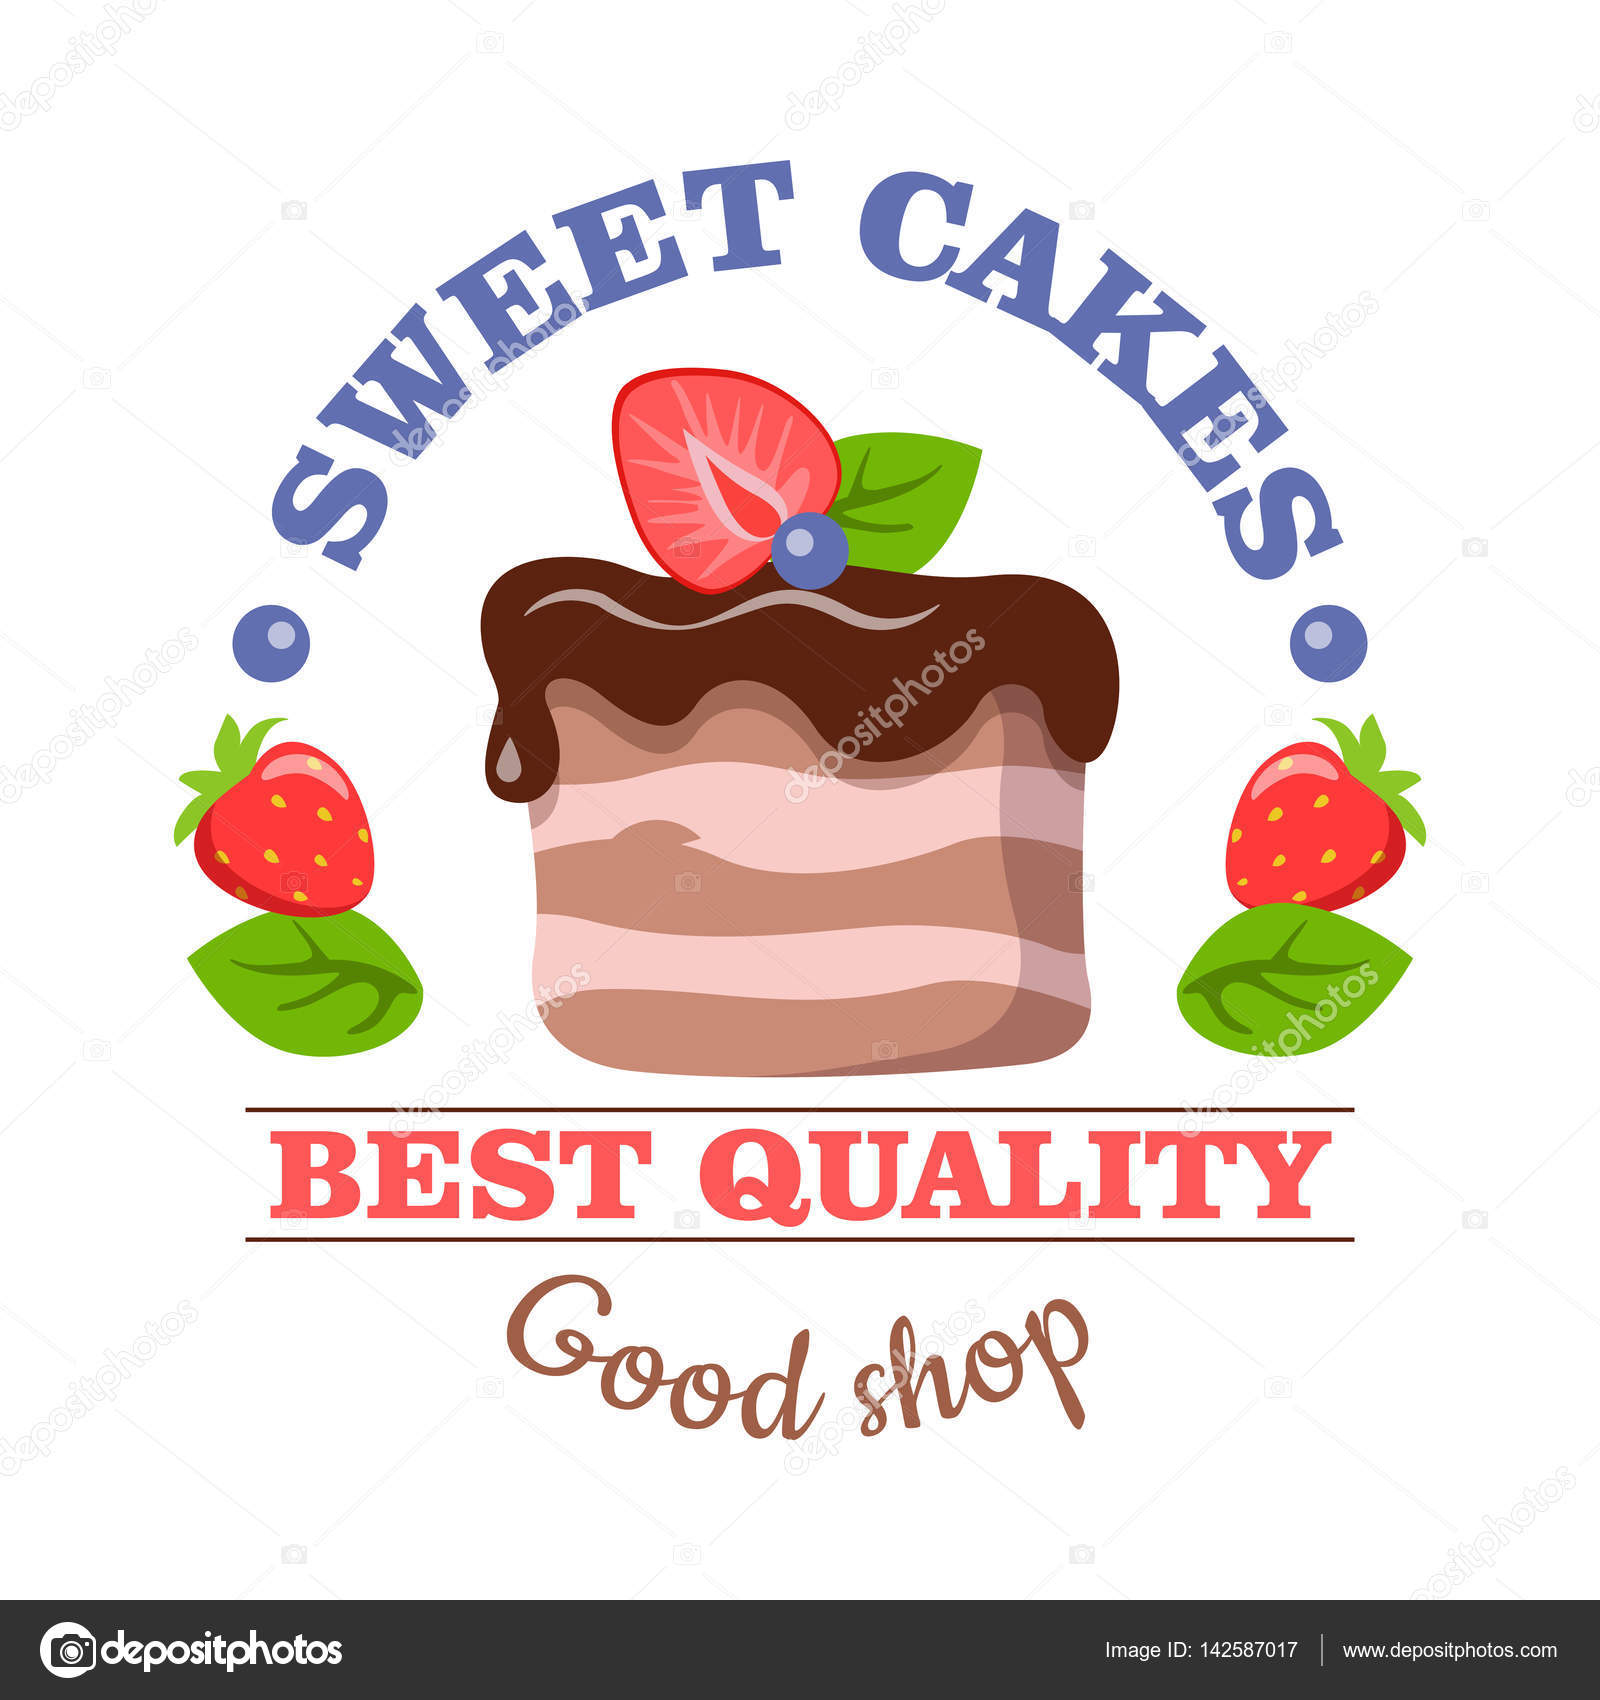 Sweet Cakes Best Quality Good Shop Vector Logo Stock Vector